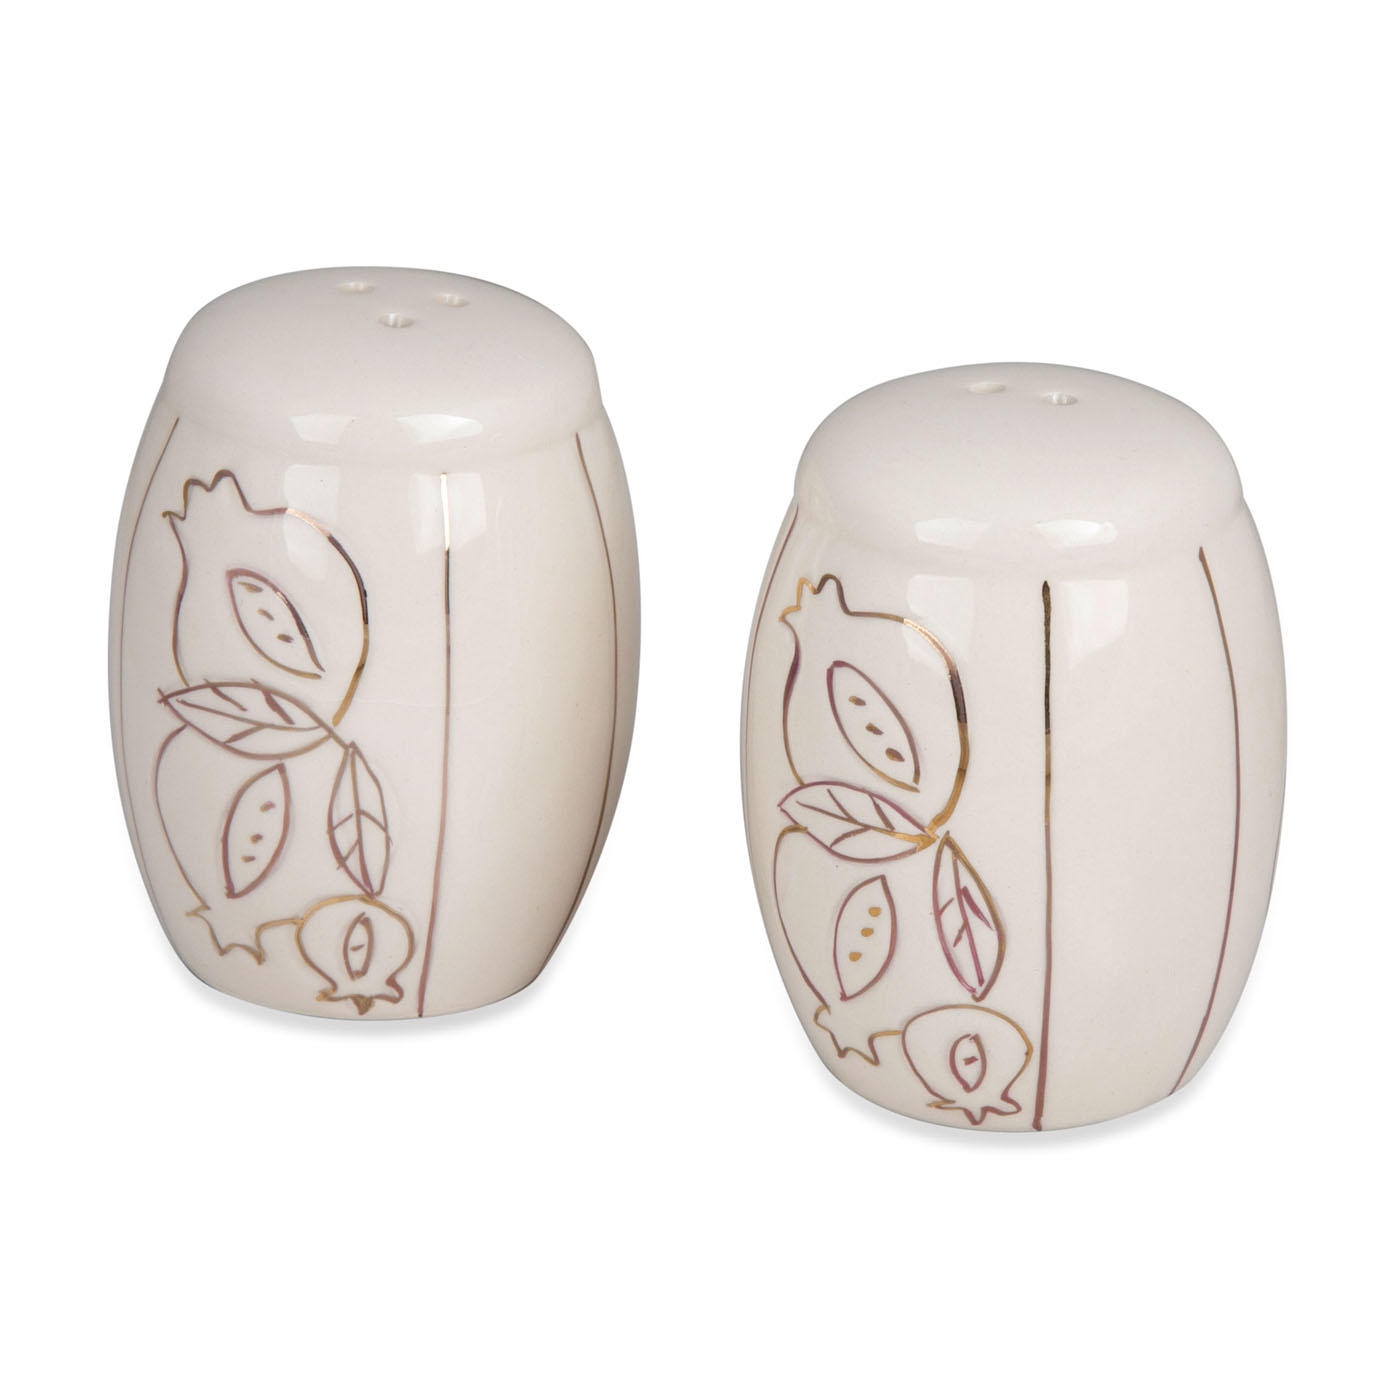 Ceramic Salt and Pepper Shakers with Golden Pomegranates - 1